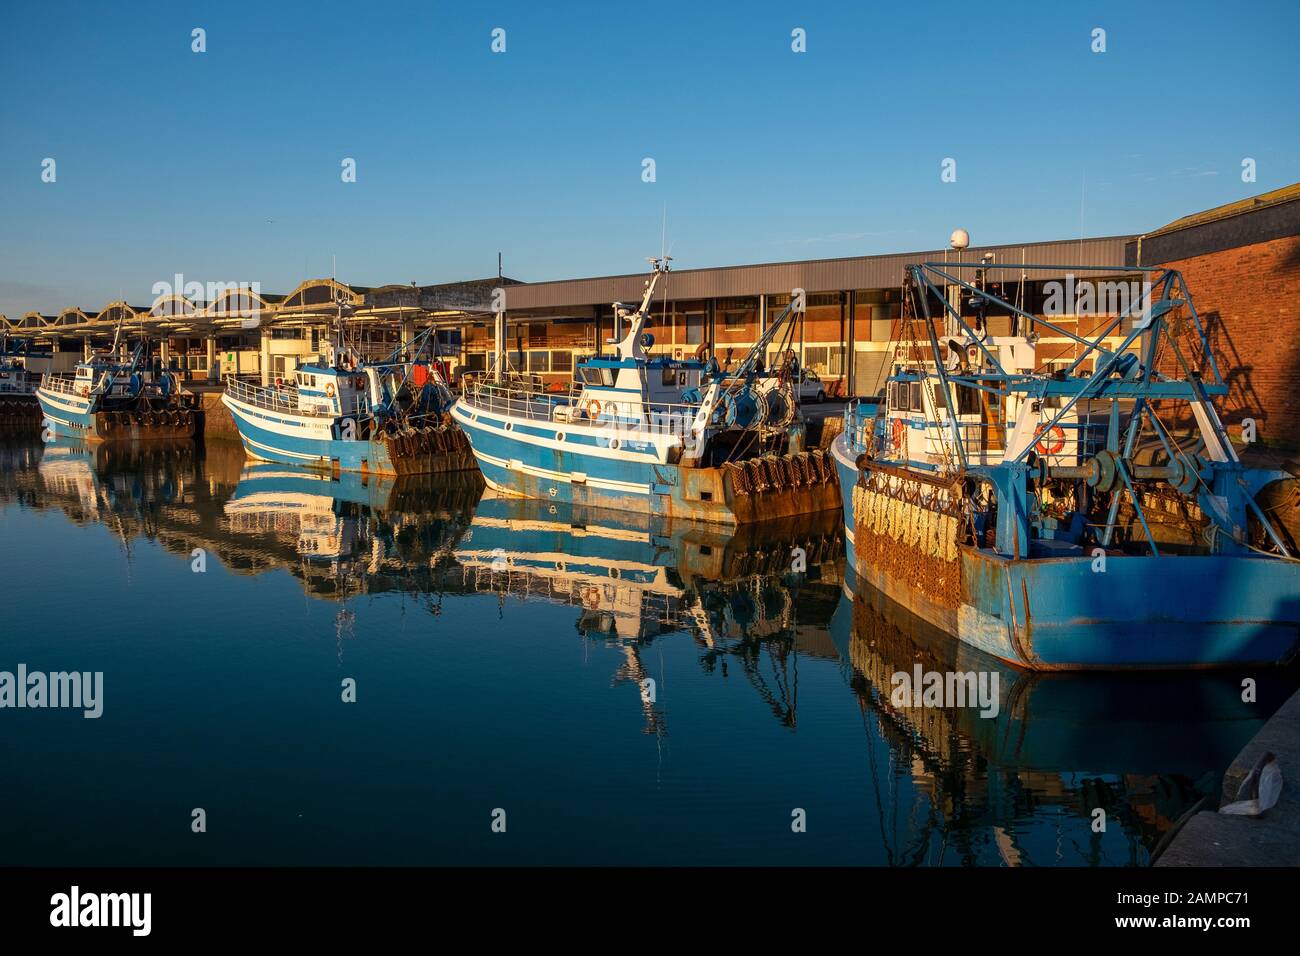 On Quai Gallieni, Dieppe, trawlers are moors quayside on on Quai Gallieni in the Bassin Duquesne Stock Photo